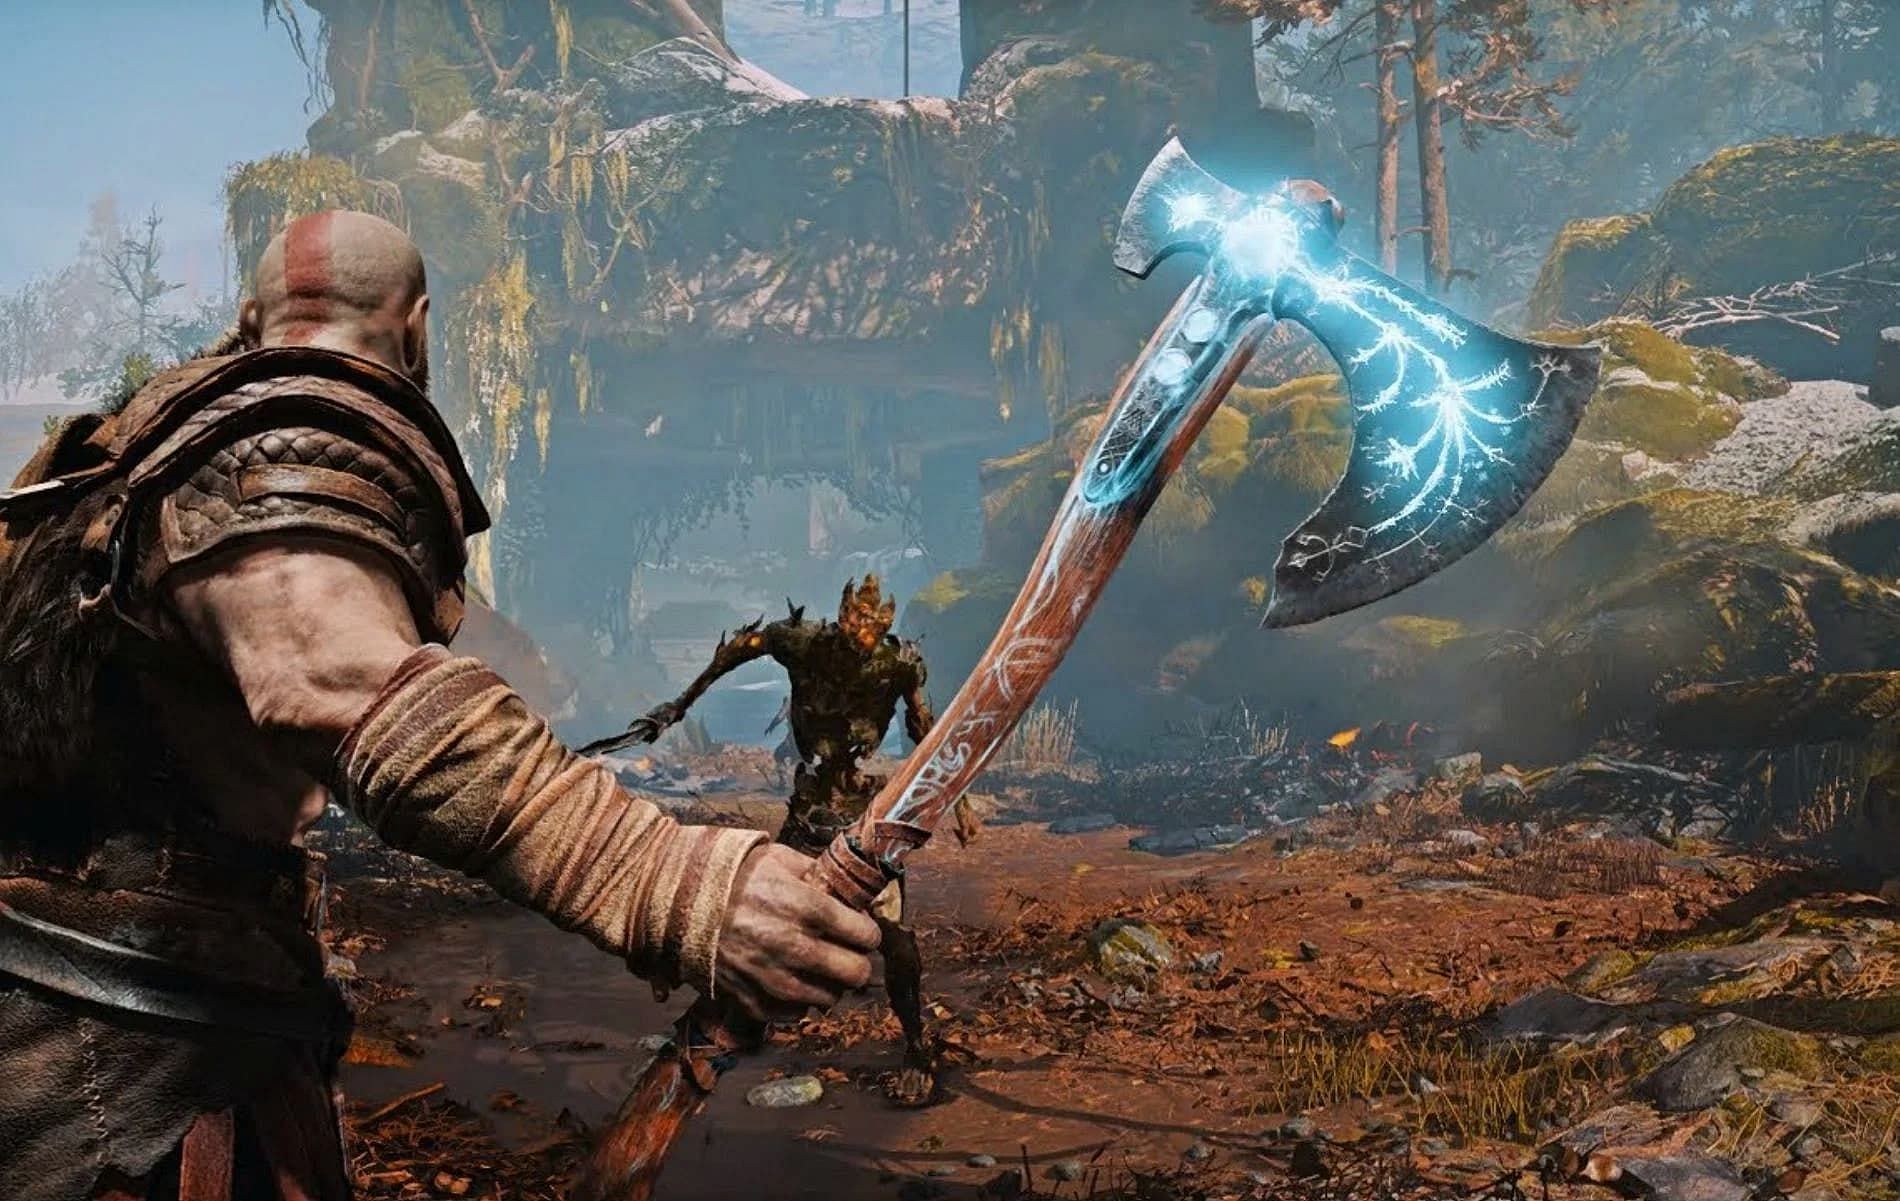 The Wrath of the Frost Ancient is effective when it comes to controlling crowds in God of War Ragnarok (Image via Sony)